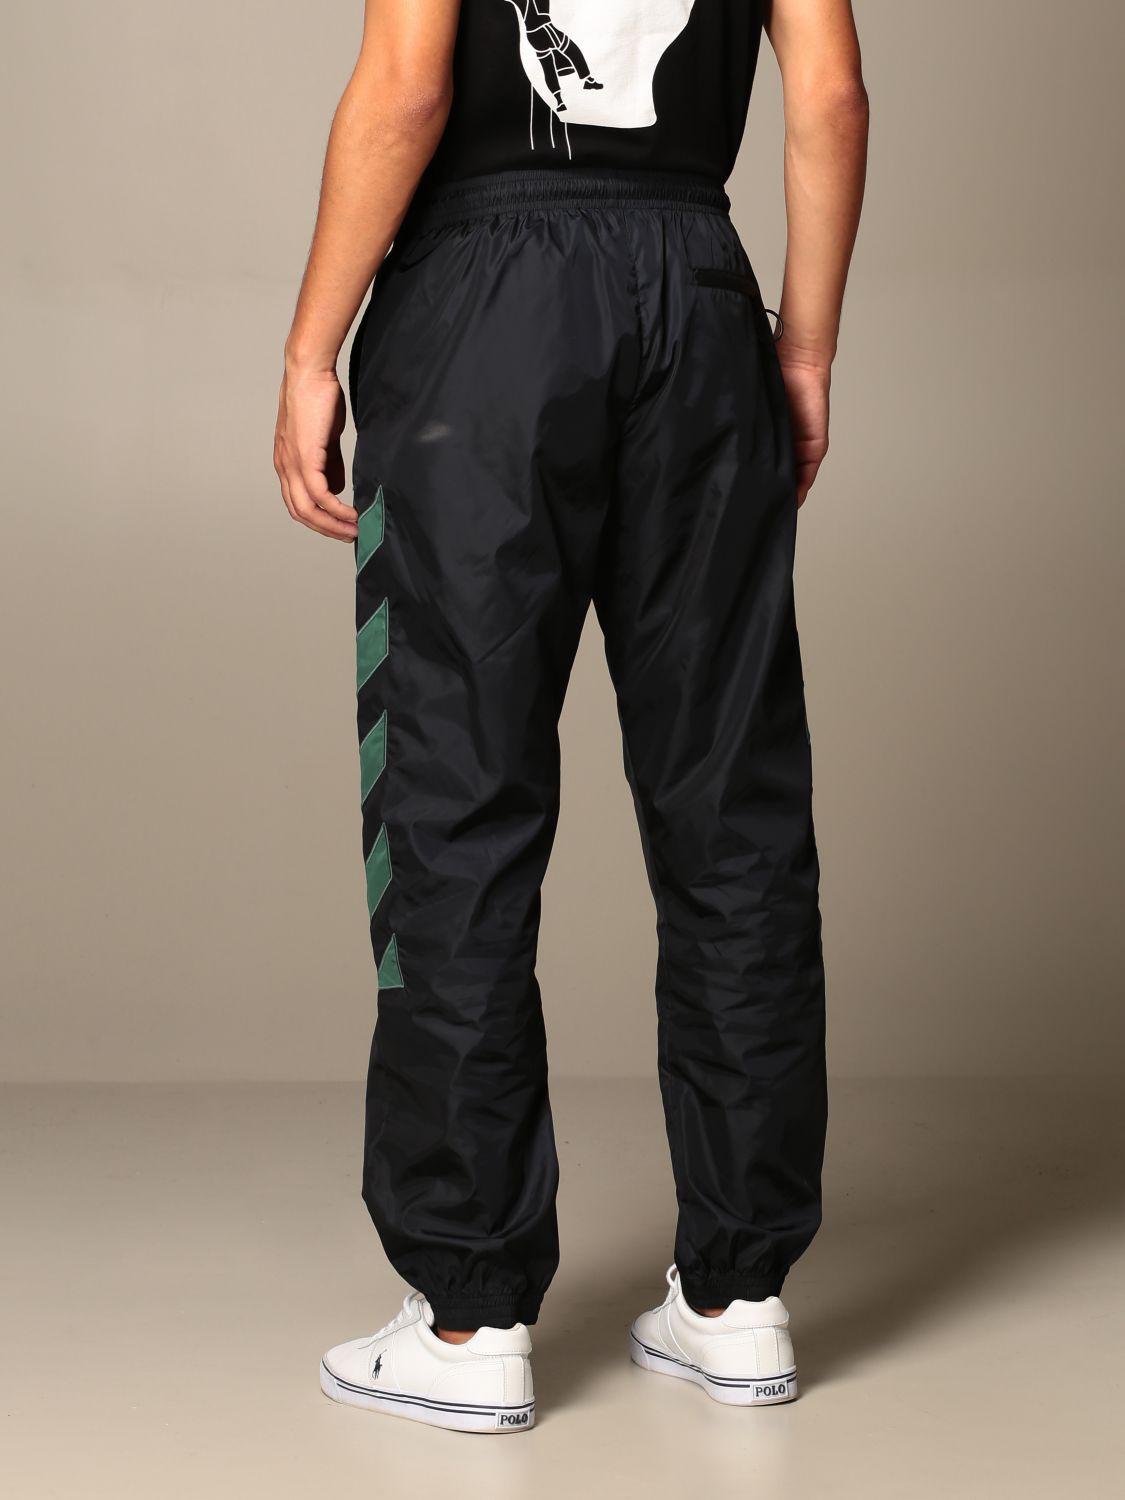 Missionary Build on land OFF-WHITE: Off White nylon jogging trousers with logo - Black | Off-White  pants OMCA086E20FAB002 online on GIGLIO.COM